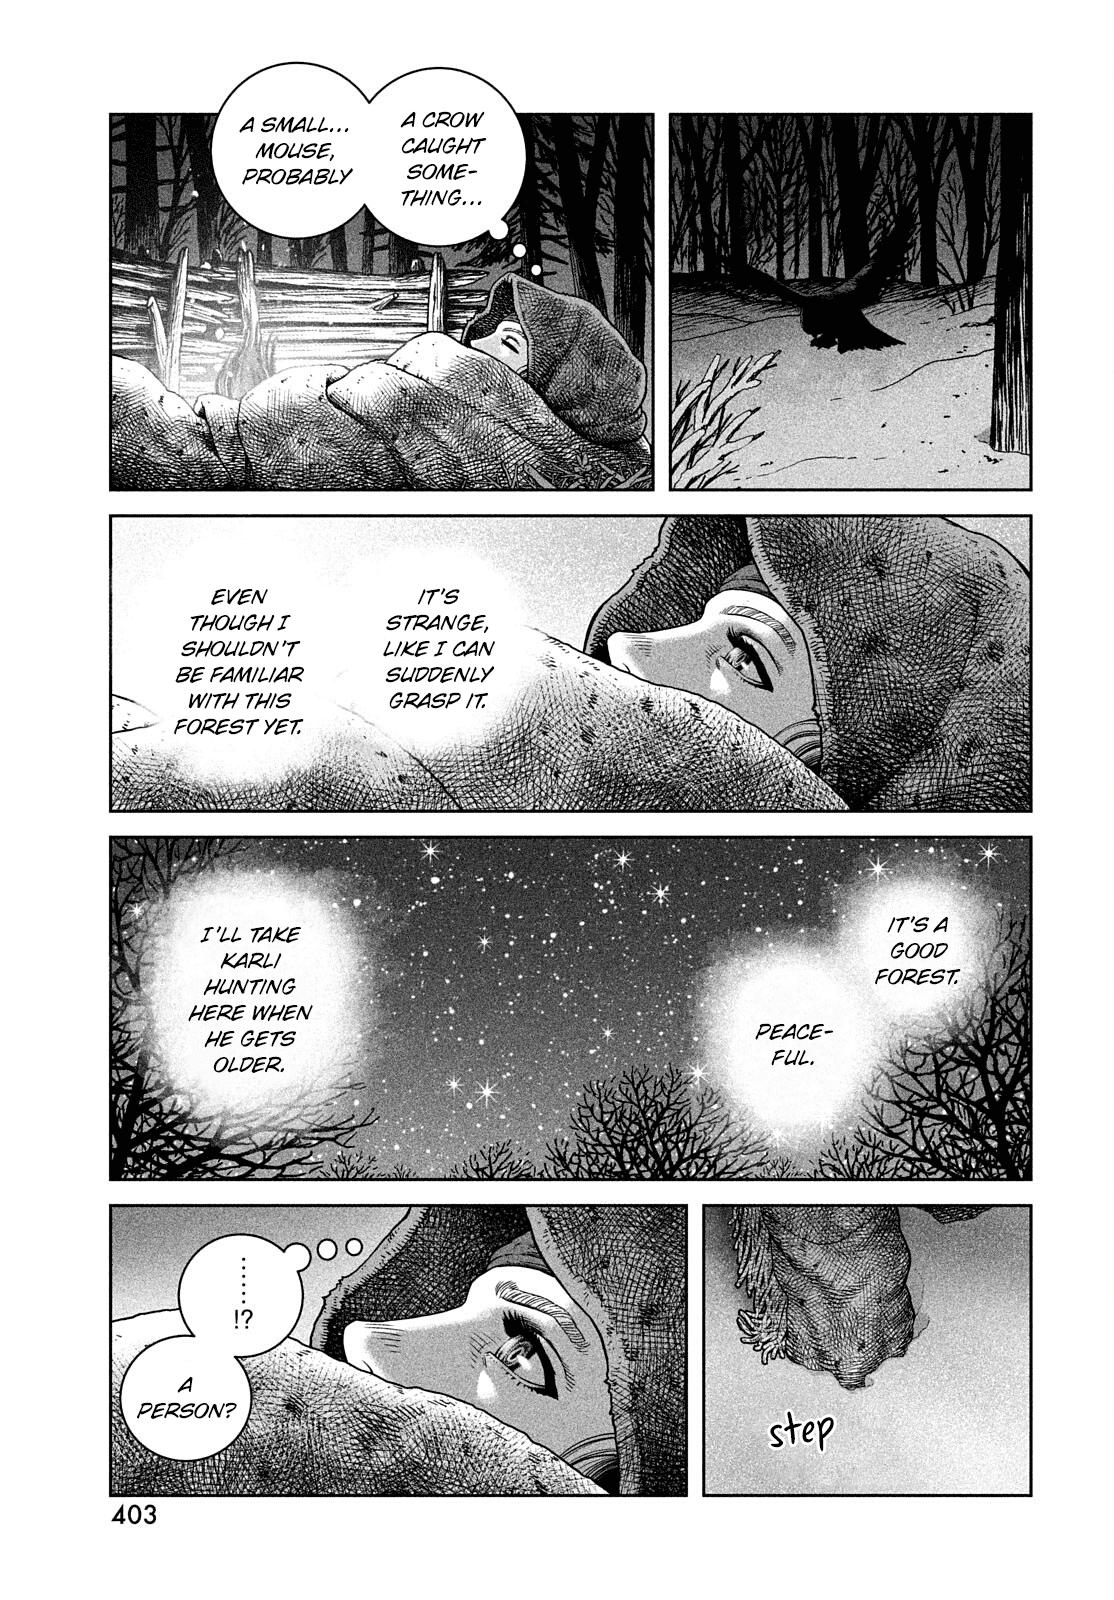 vinland saga 188, vinland saga 188, Read vinland saga 188, vinland saga 188 Manga, vinland saga 188 english, vinland saga 188 raw manga, vinland saga 188 online, vinland saga 188 high quality, vinland saga 188 chapter, vinland saga 188 manga scan